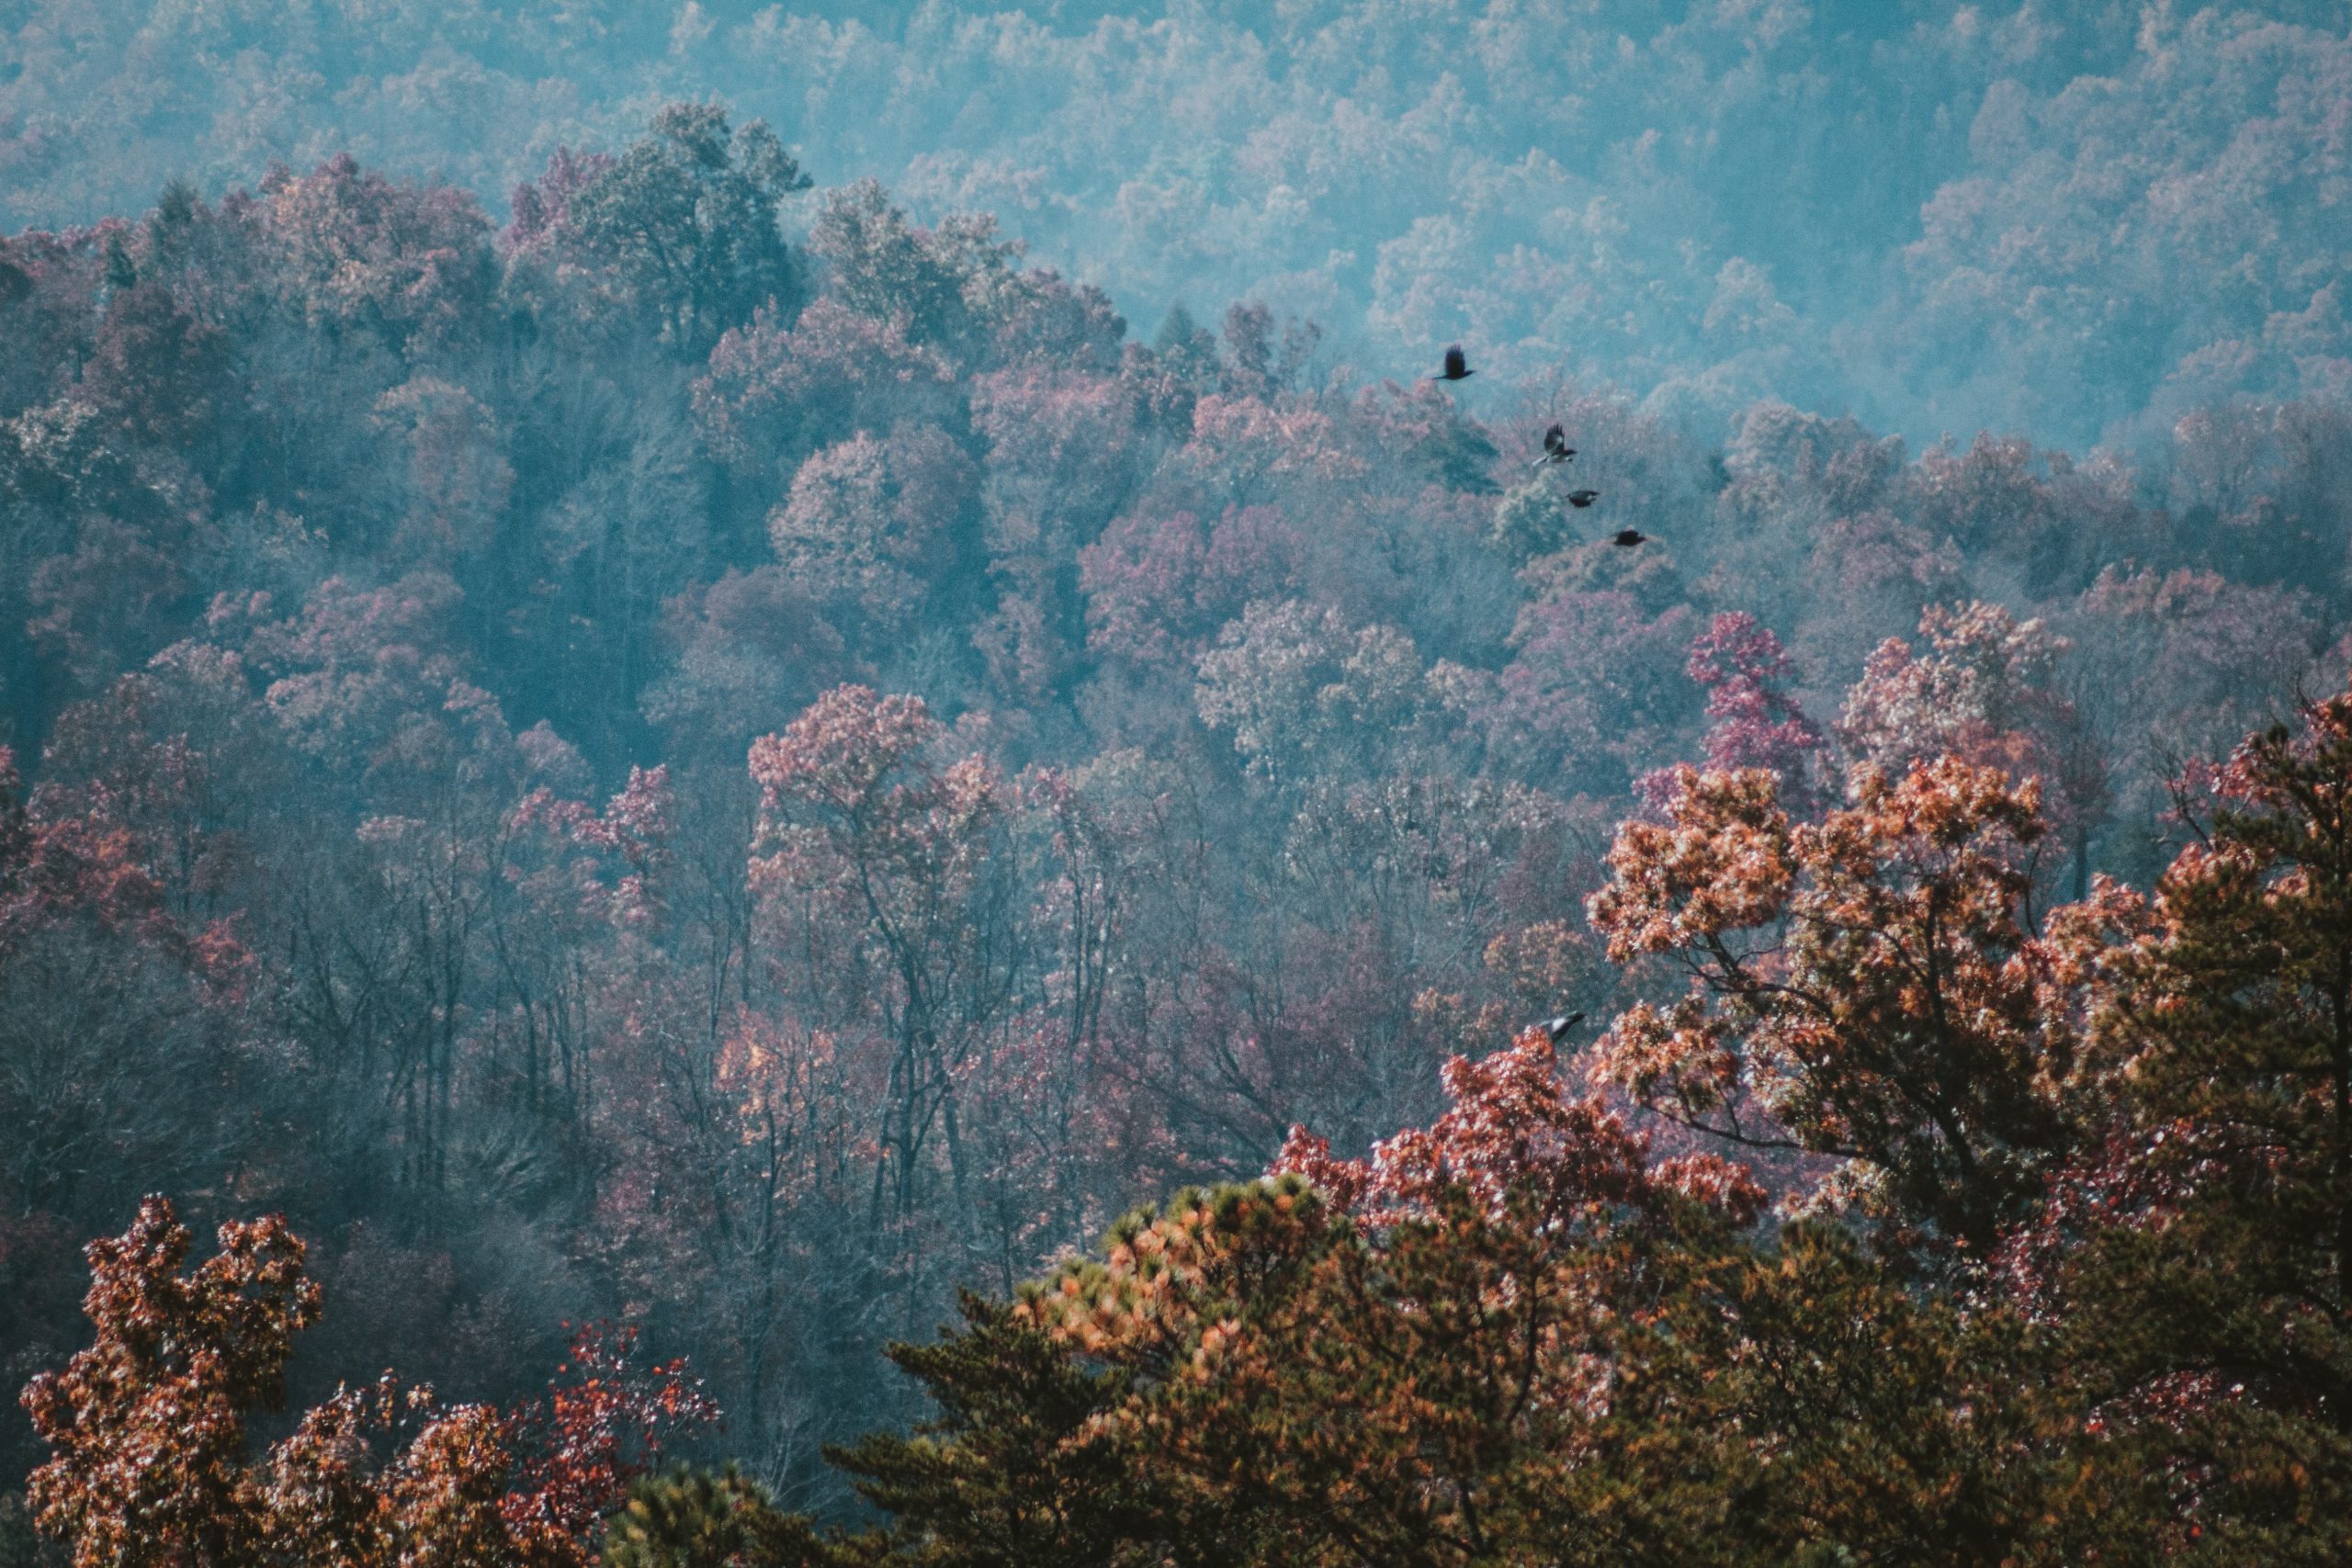 A view of the trees covering Appalachian Mountains